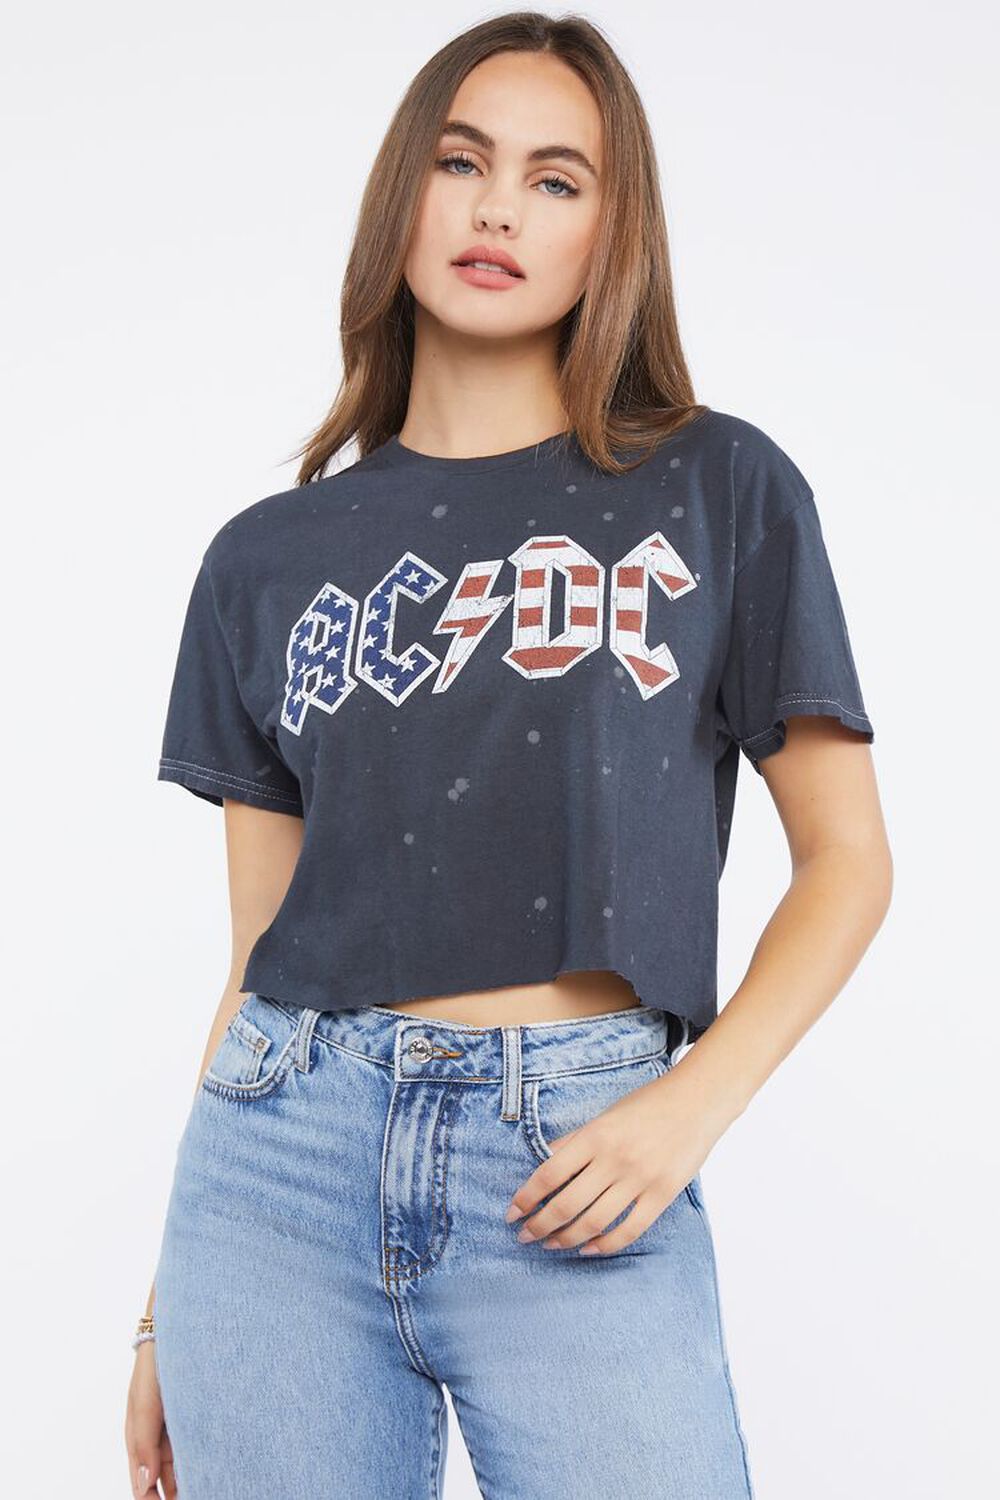 BLACK/MULTI ACDC Tour Graphic Cropped Tee, image 1